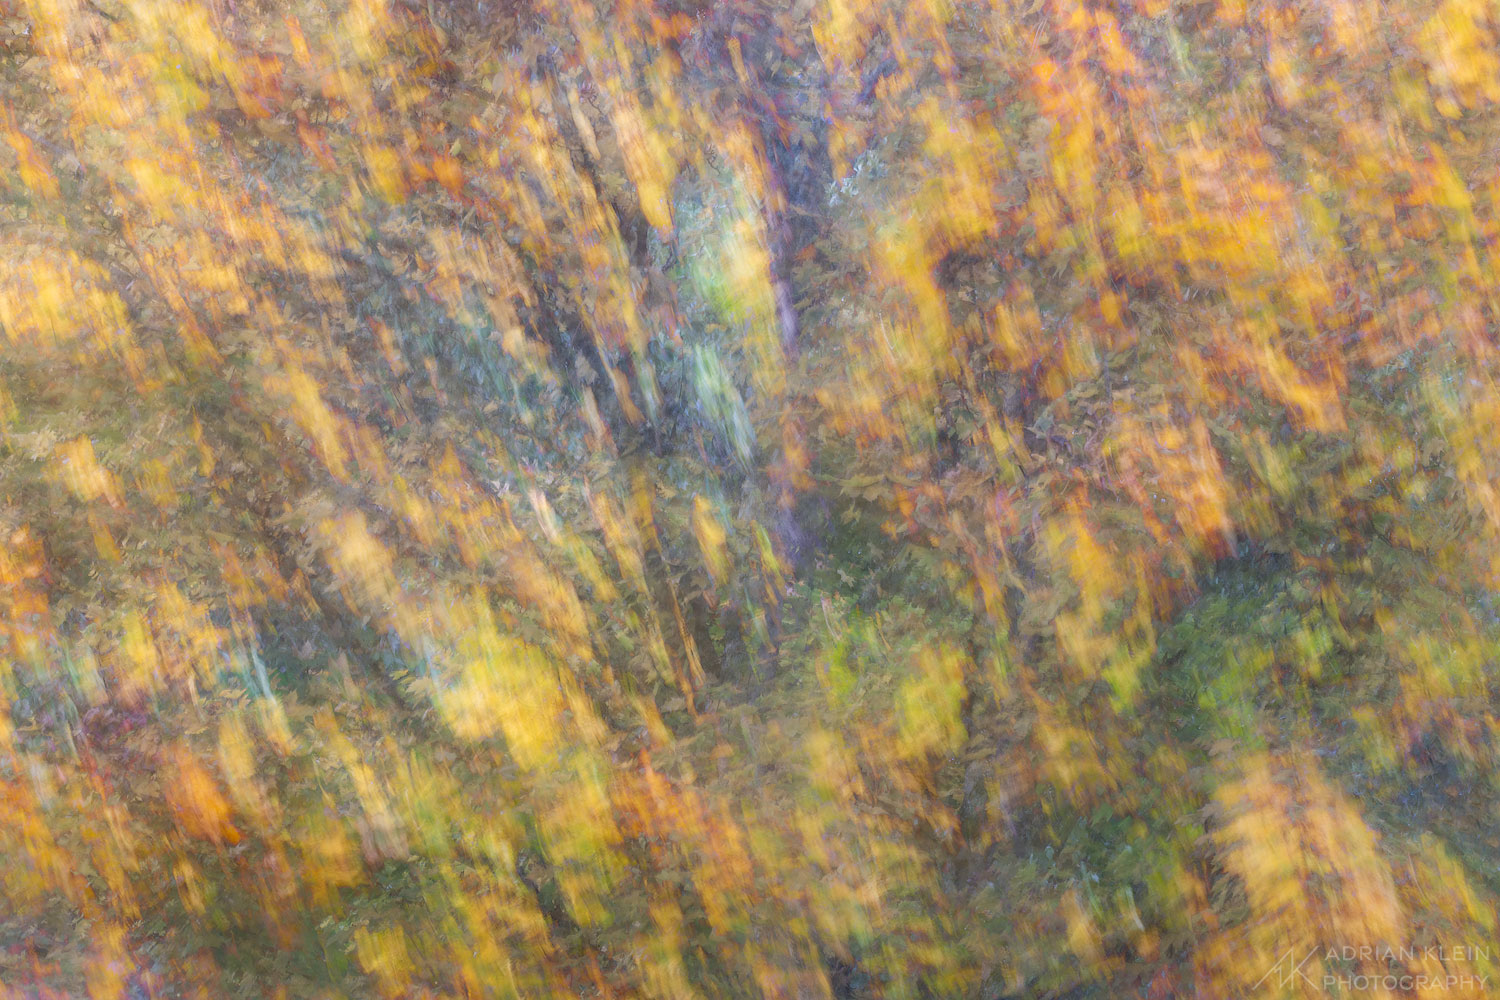 Abstract view taken in during fall in Oregon